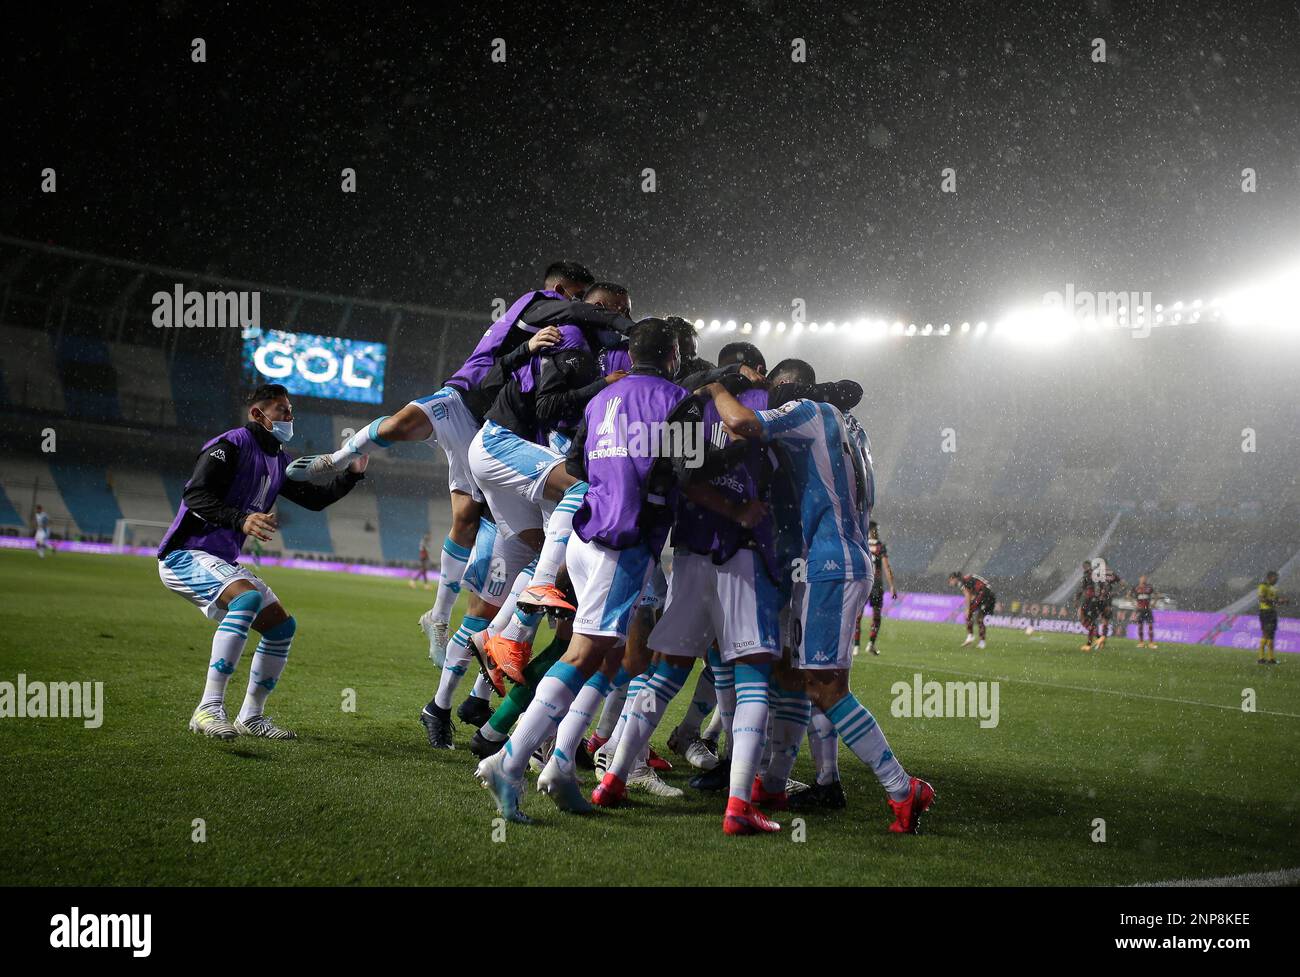 Hector Fertoli of Argentina's Racing Club celebrates with teammates after scoring his side's opening goal against Brazil's Flamengo during a Copa Libertadores soccer match in Buenos Aires, Argentina, Tuesday, Nov. 24, 2020.(Juan Roncoroni/Pool via AP) Banque D'Images